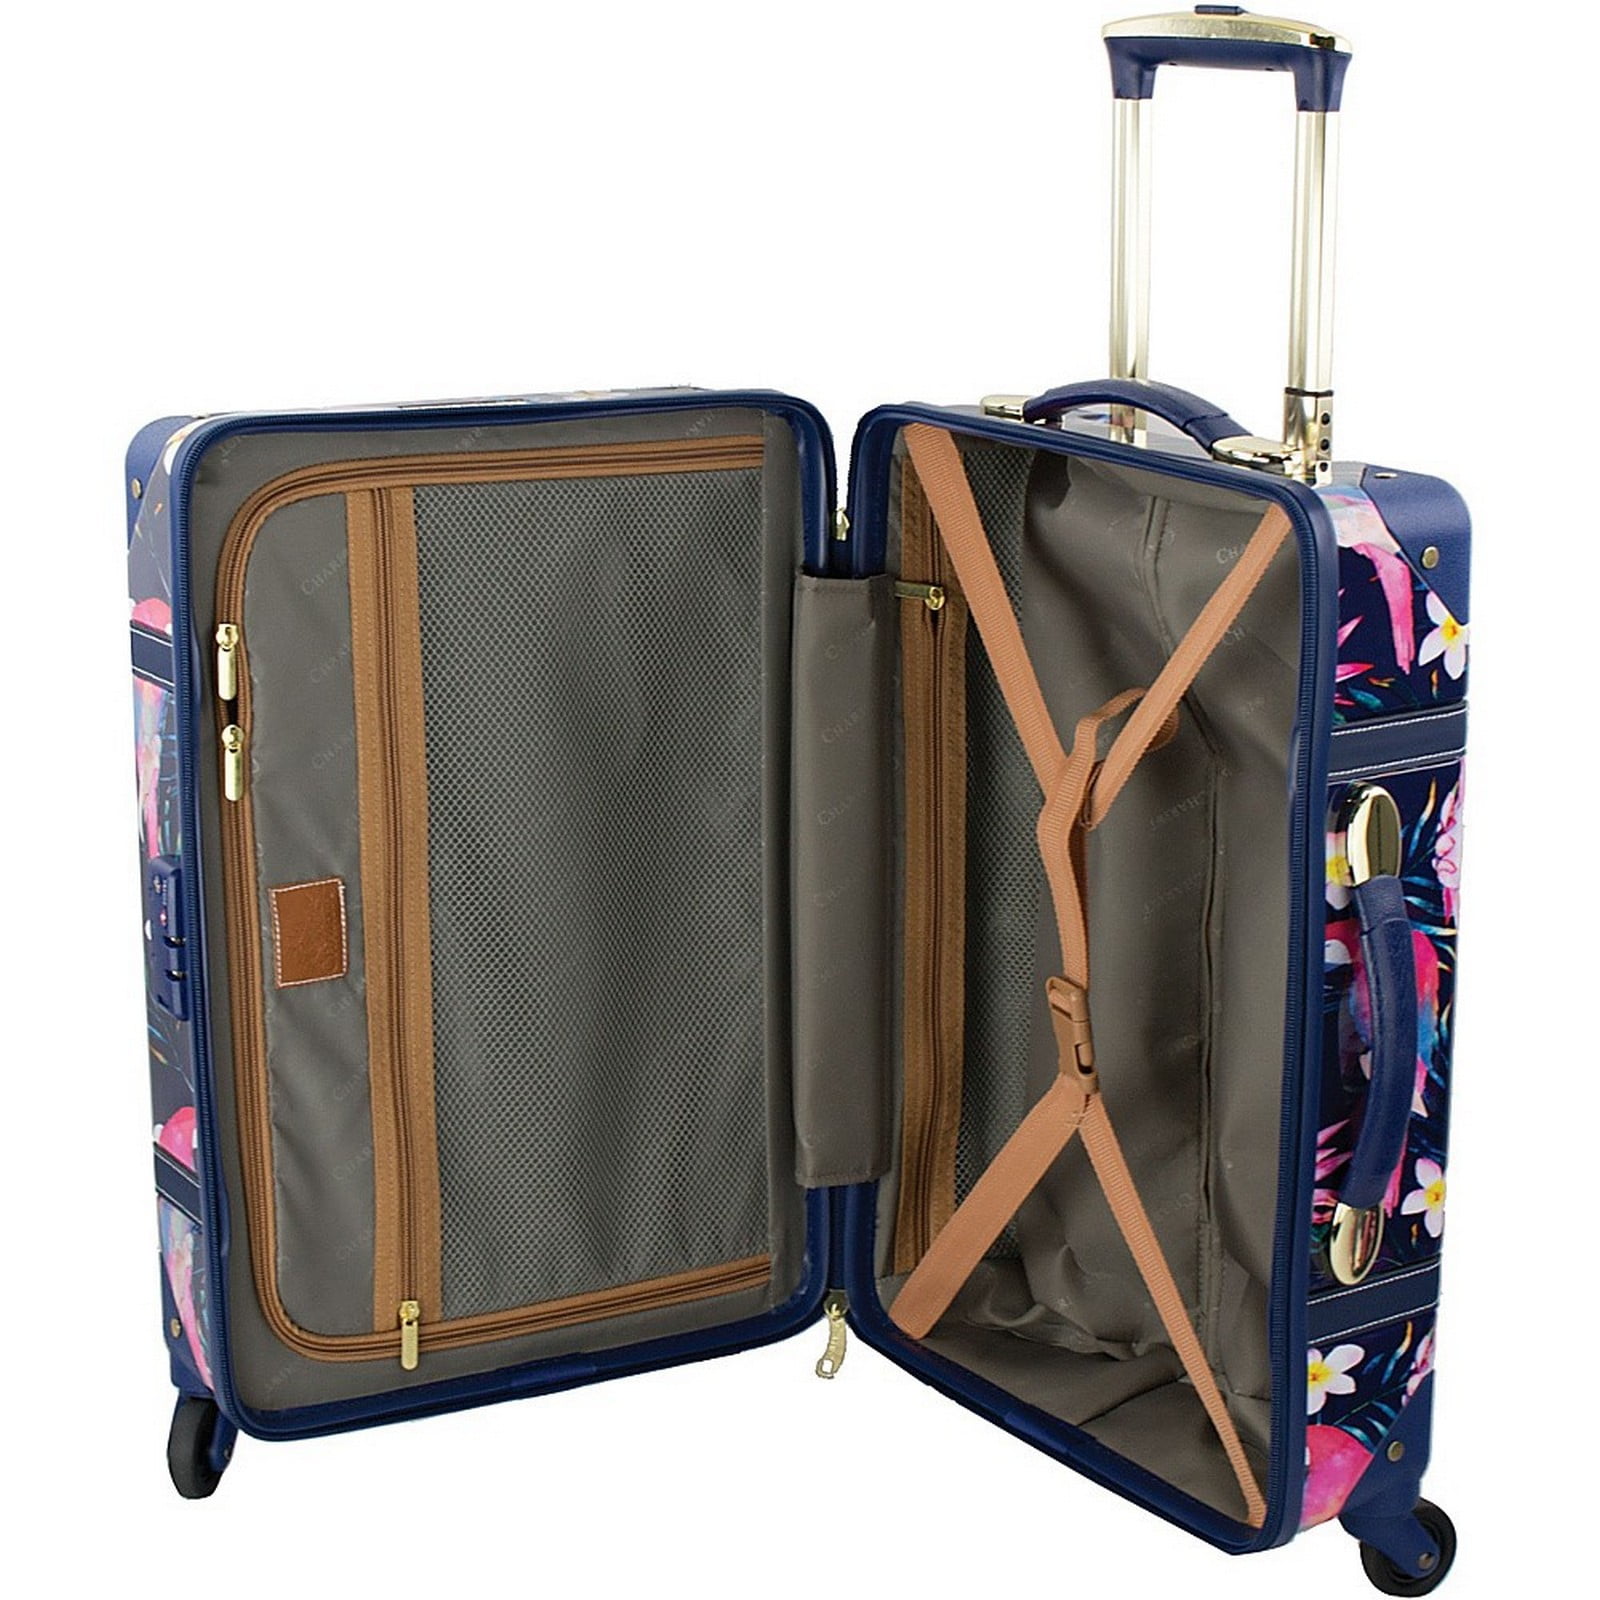 Chariot Travelware - Hi Chariot Friends! Have a very happy Valentines day  with Gatsby Black 2pc luggage set! Macy's #valentinesdaysale #vdaysale #sale  #gatsby #coolhearts #discohearts #luggage #lugggageset #travelblogger  #travel #seetheworld